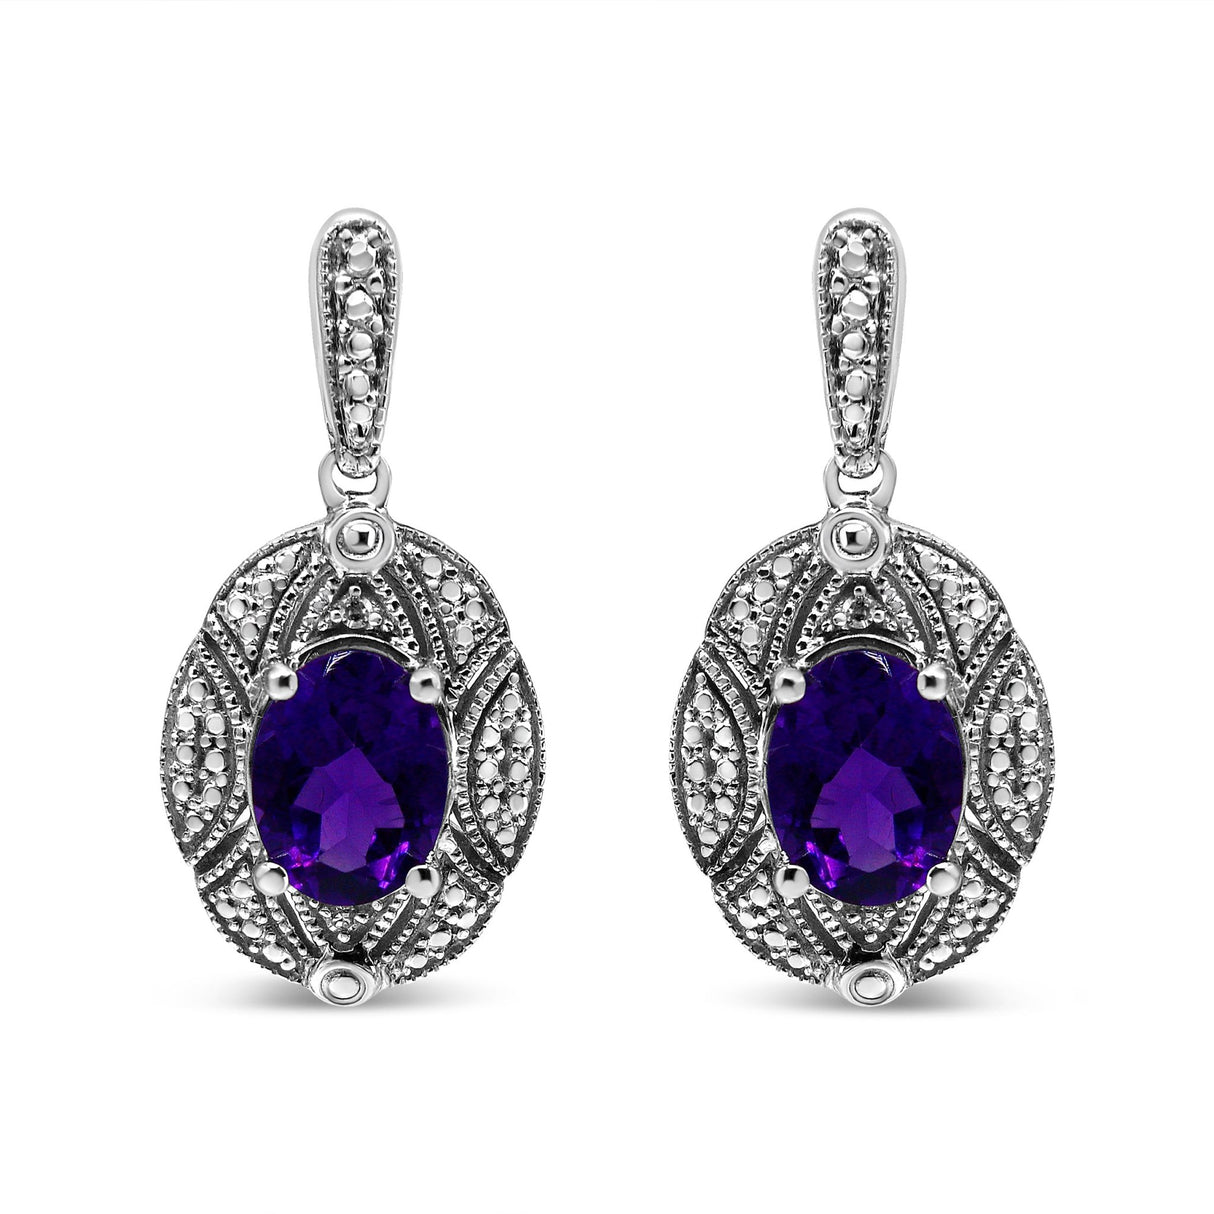 .925 Sterling Silver Diamond Accent And 8X6mm Purple Oval Amethyst Stud Earrings (I-J Color, I1-I2 Clarity) - Tuesday Morning-Stud Earrings